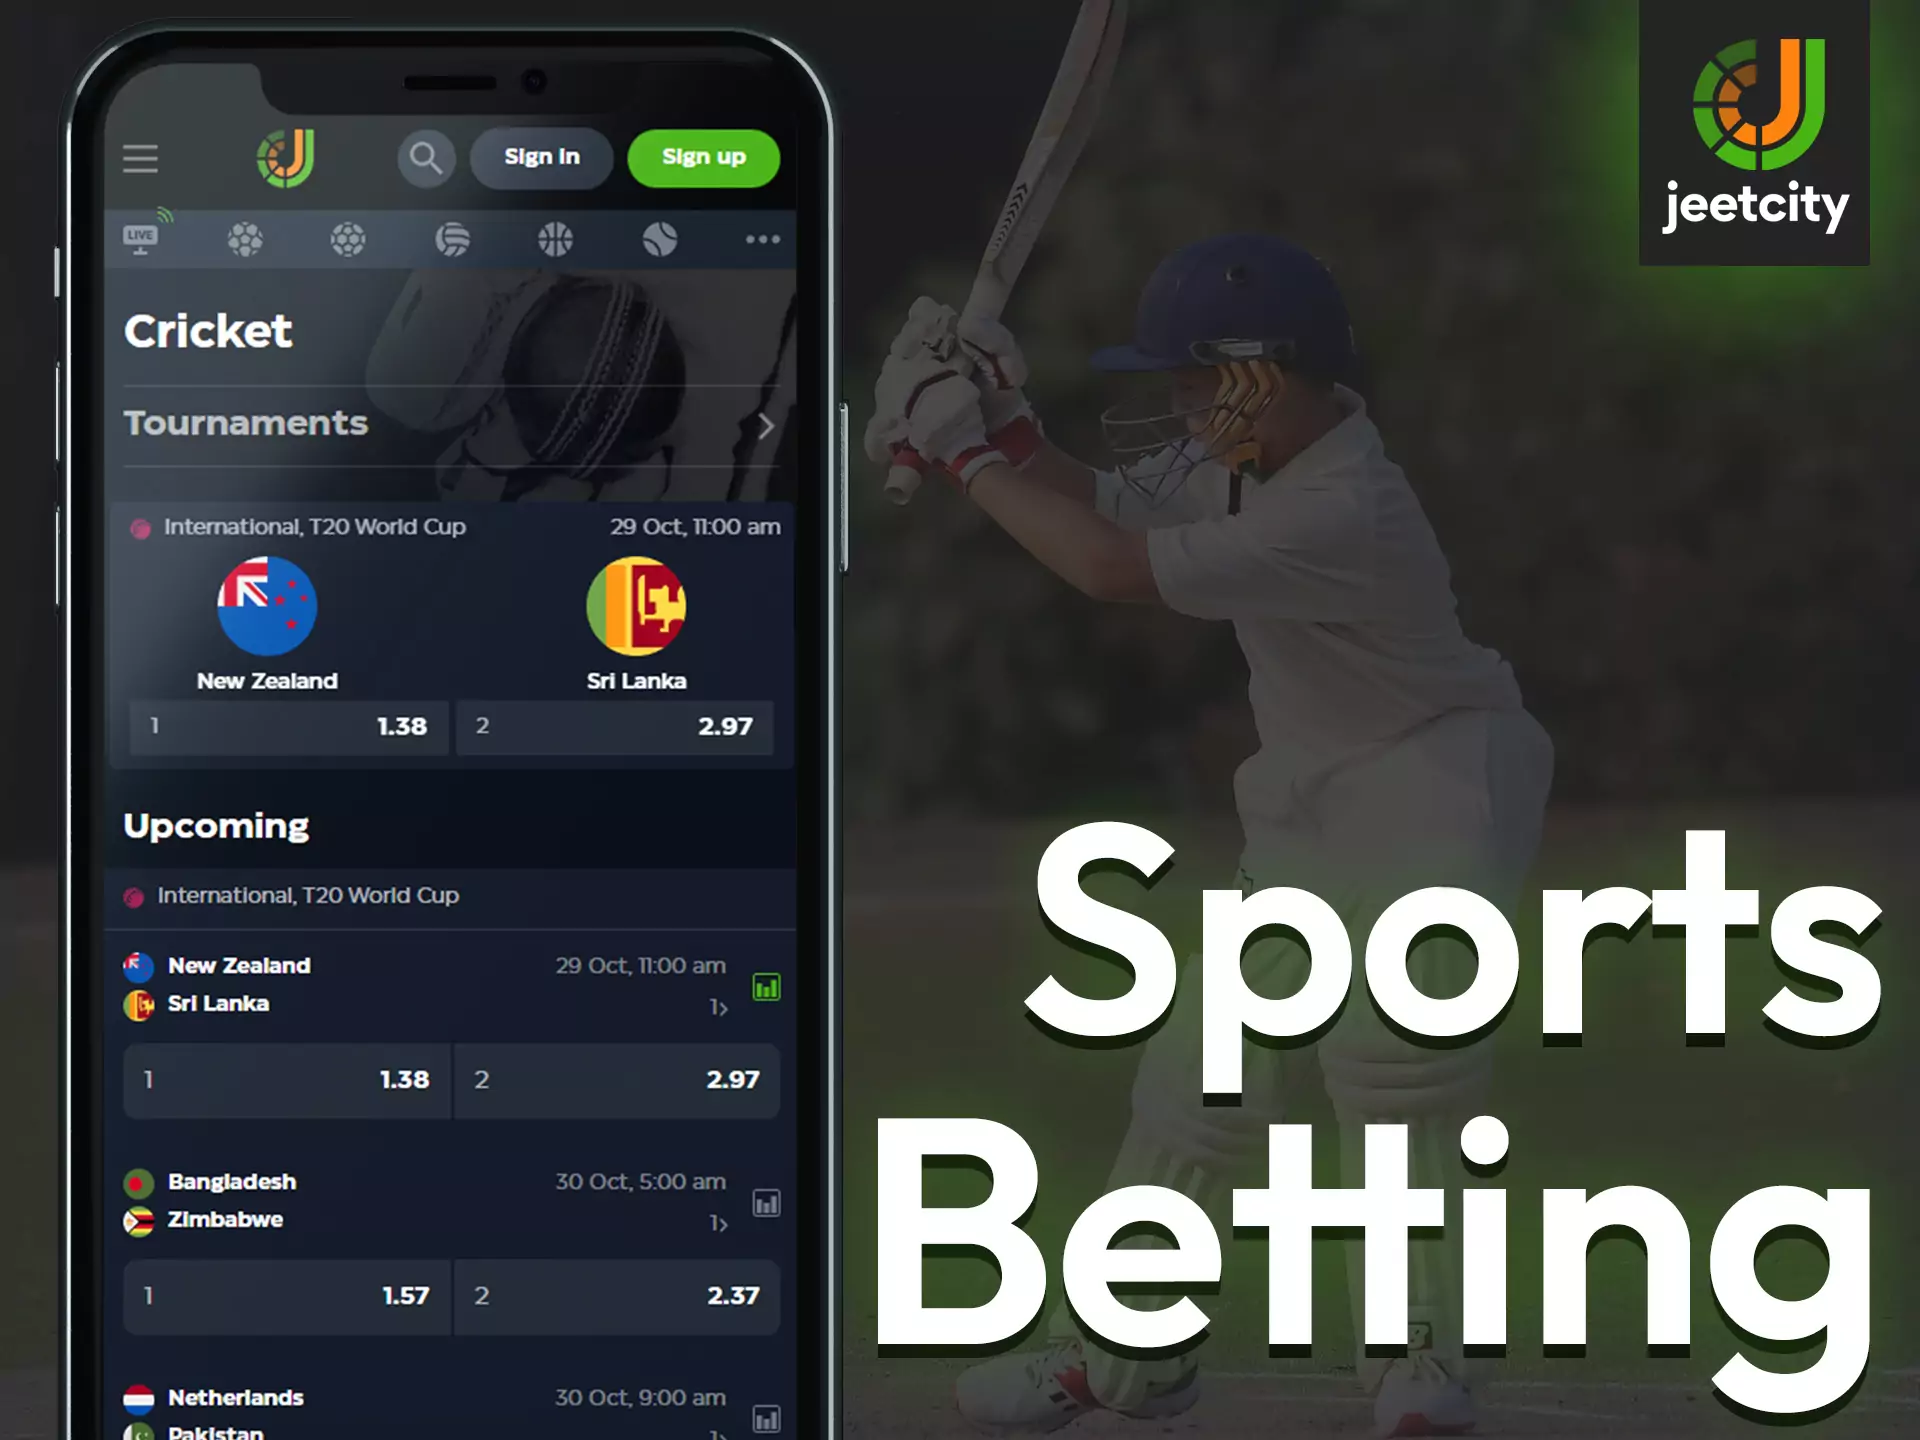 JeetCity offers users to place bets on various sports events.